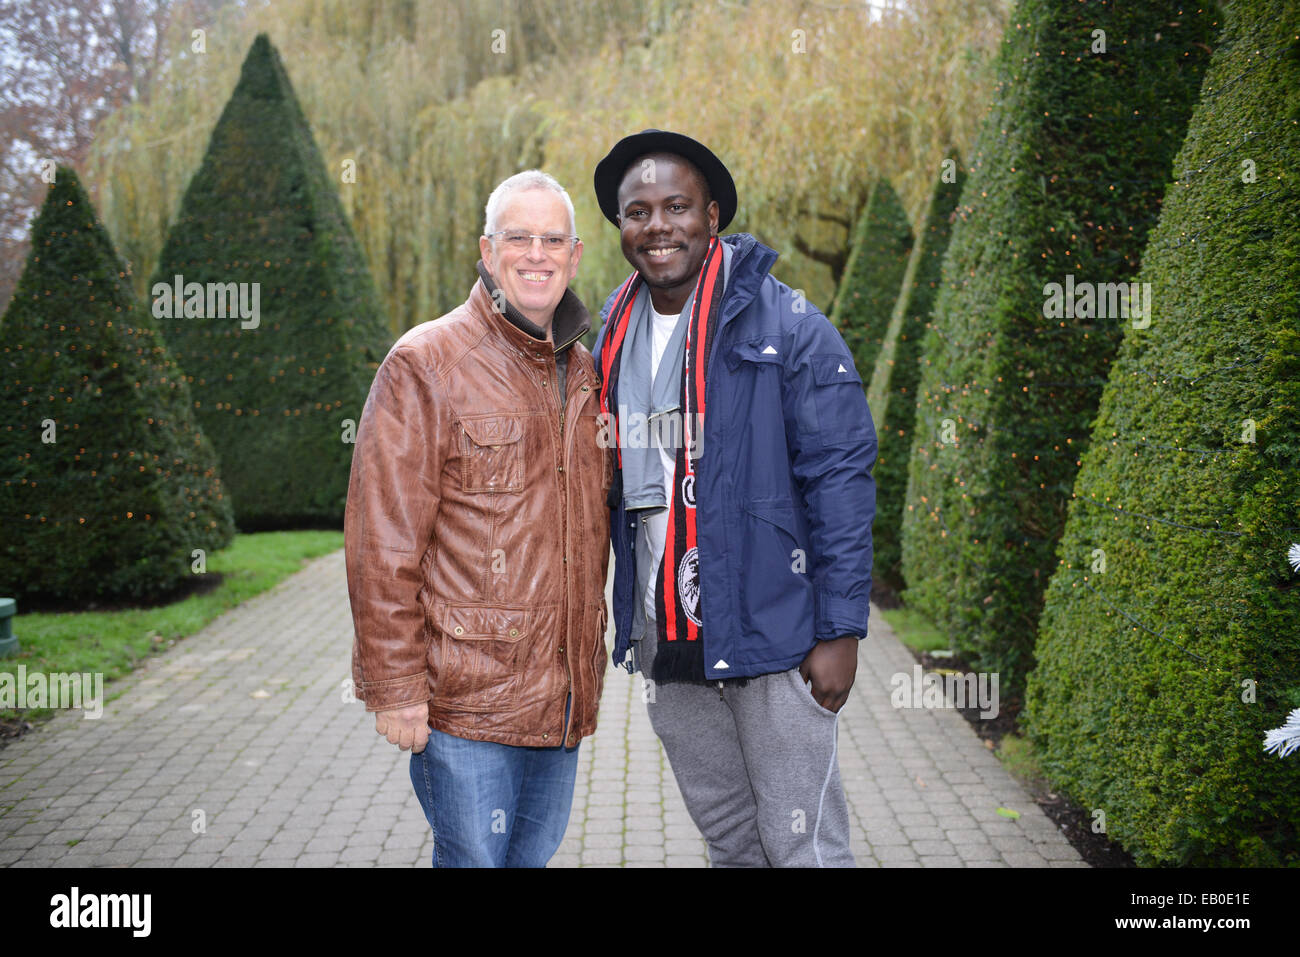 Rust, Germany. 22nd Nov, 2014. British documentary filmmaker Eugene Chaplin (L), son of legendary actor Charlie Chaplin, and Kewku Mandela (R), grandson of South African freedom fighter and former president Nelson Mandela, pose at Europa Park in Rust, Germany, 22 November 2014. Photo: PATRICK SEEGER/dpa/Alamy Live News Stock Photo